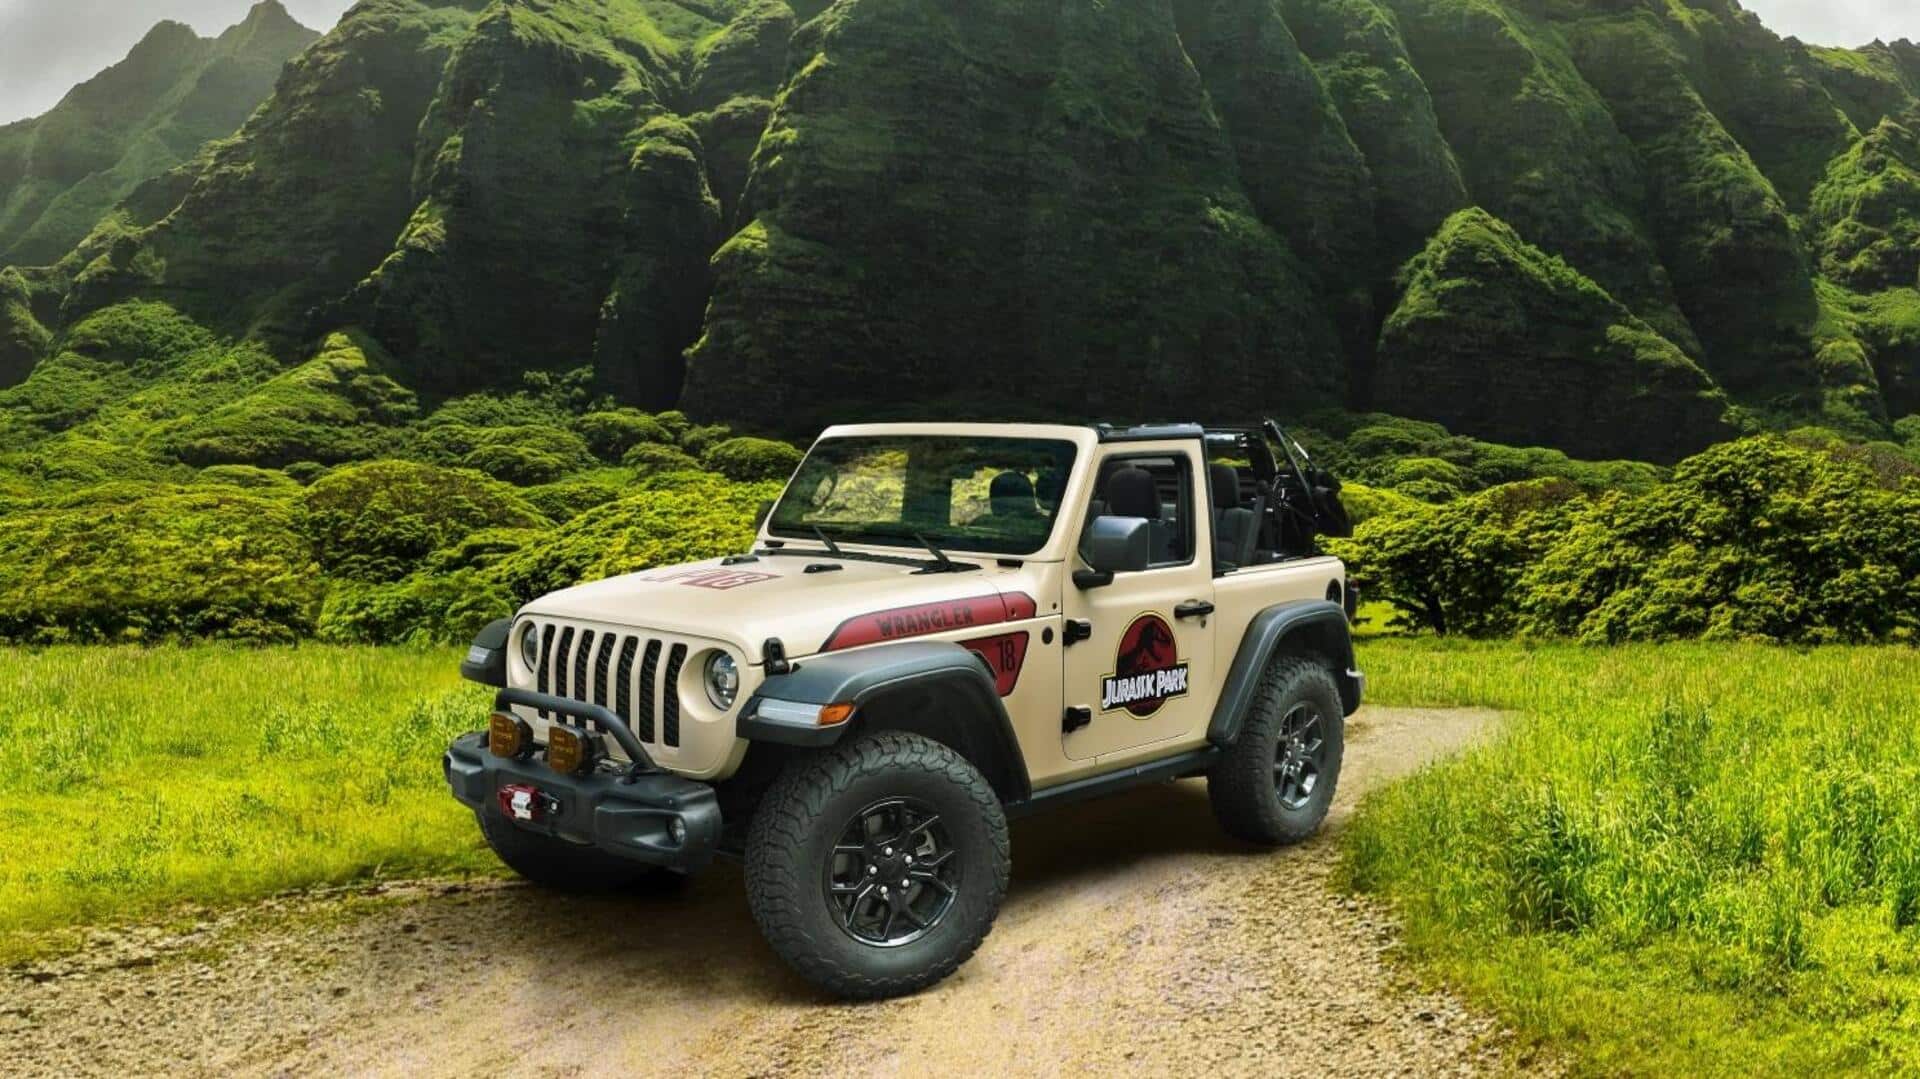 Jeep pays homage to 'Jurassic Park' with limited-run decal package